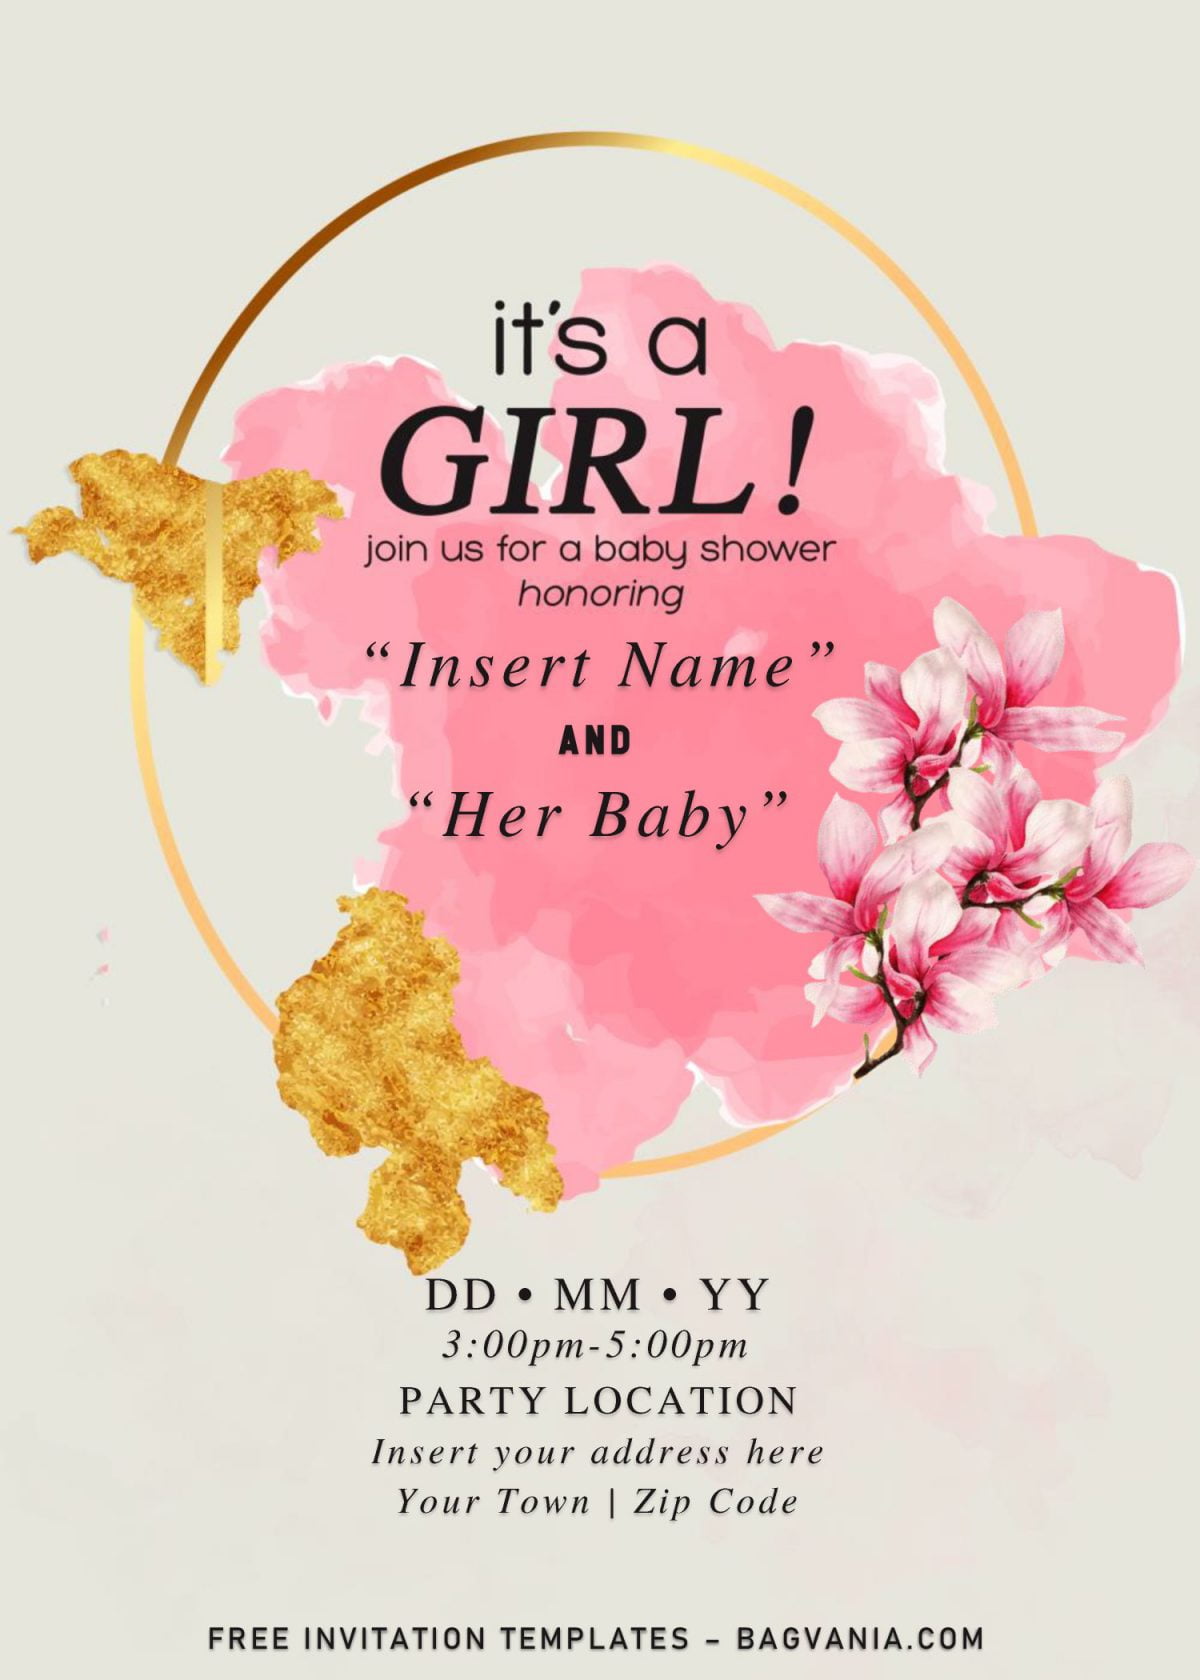 Free Gold Glitter Girl Baby Shower Invitation Templates For Word and has portrait design